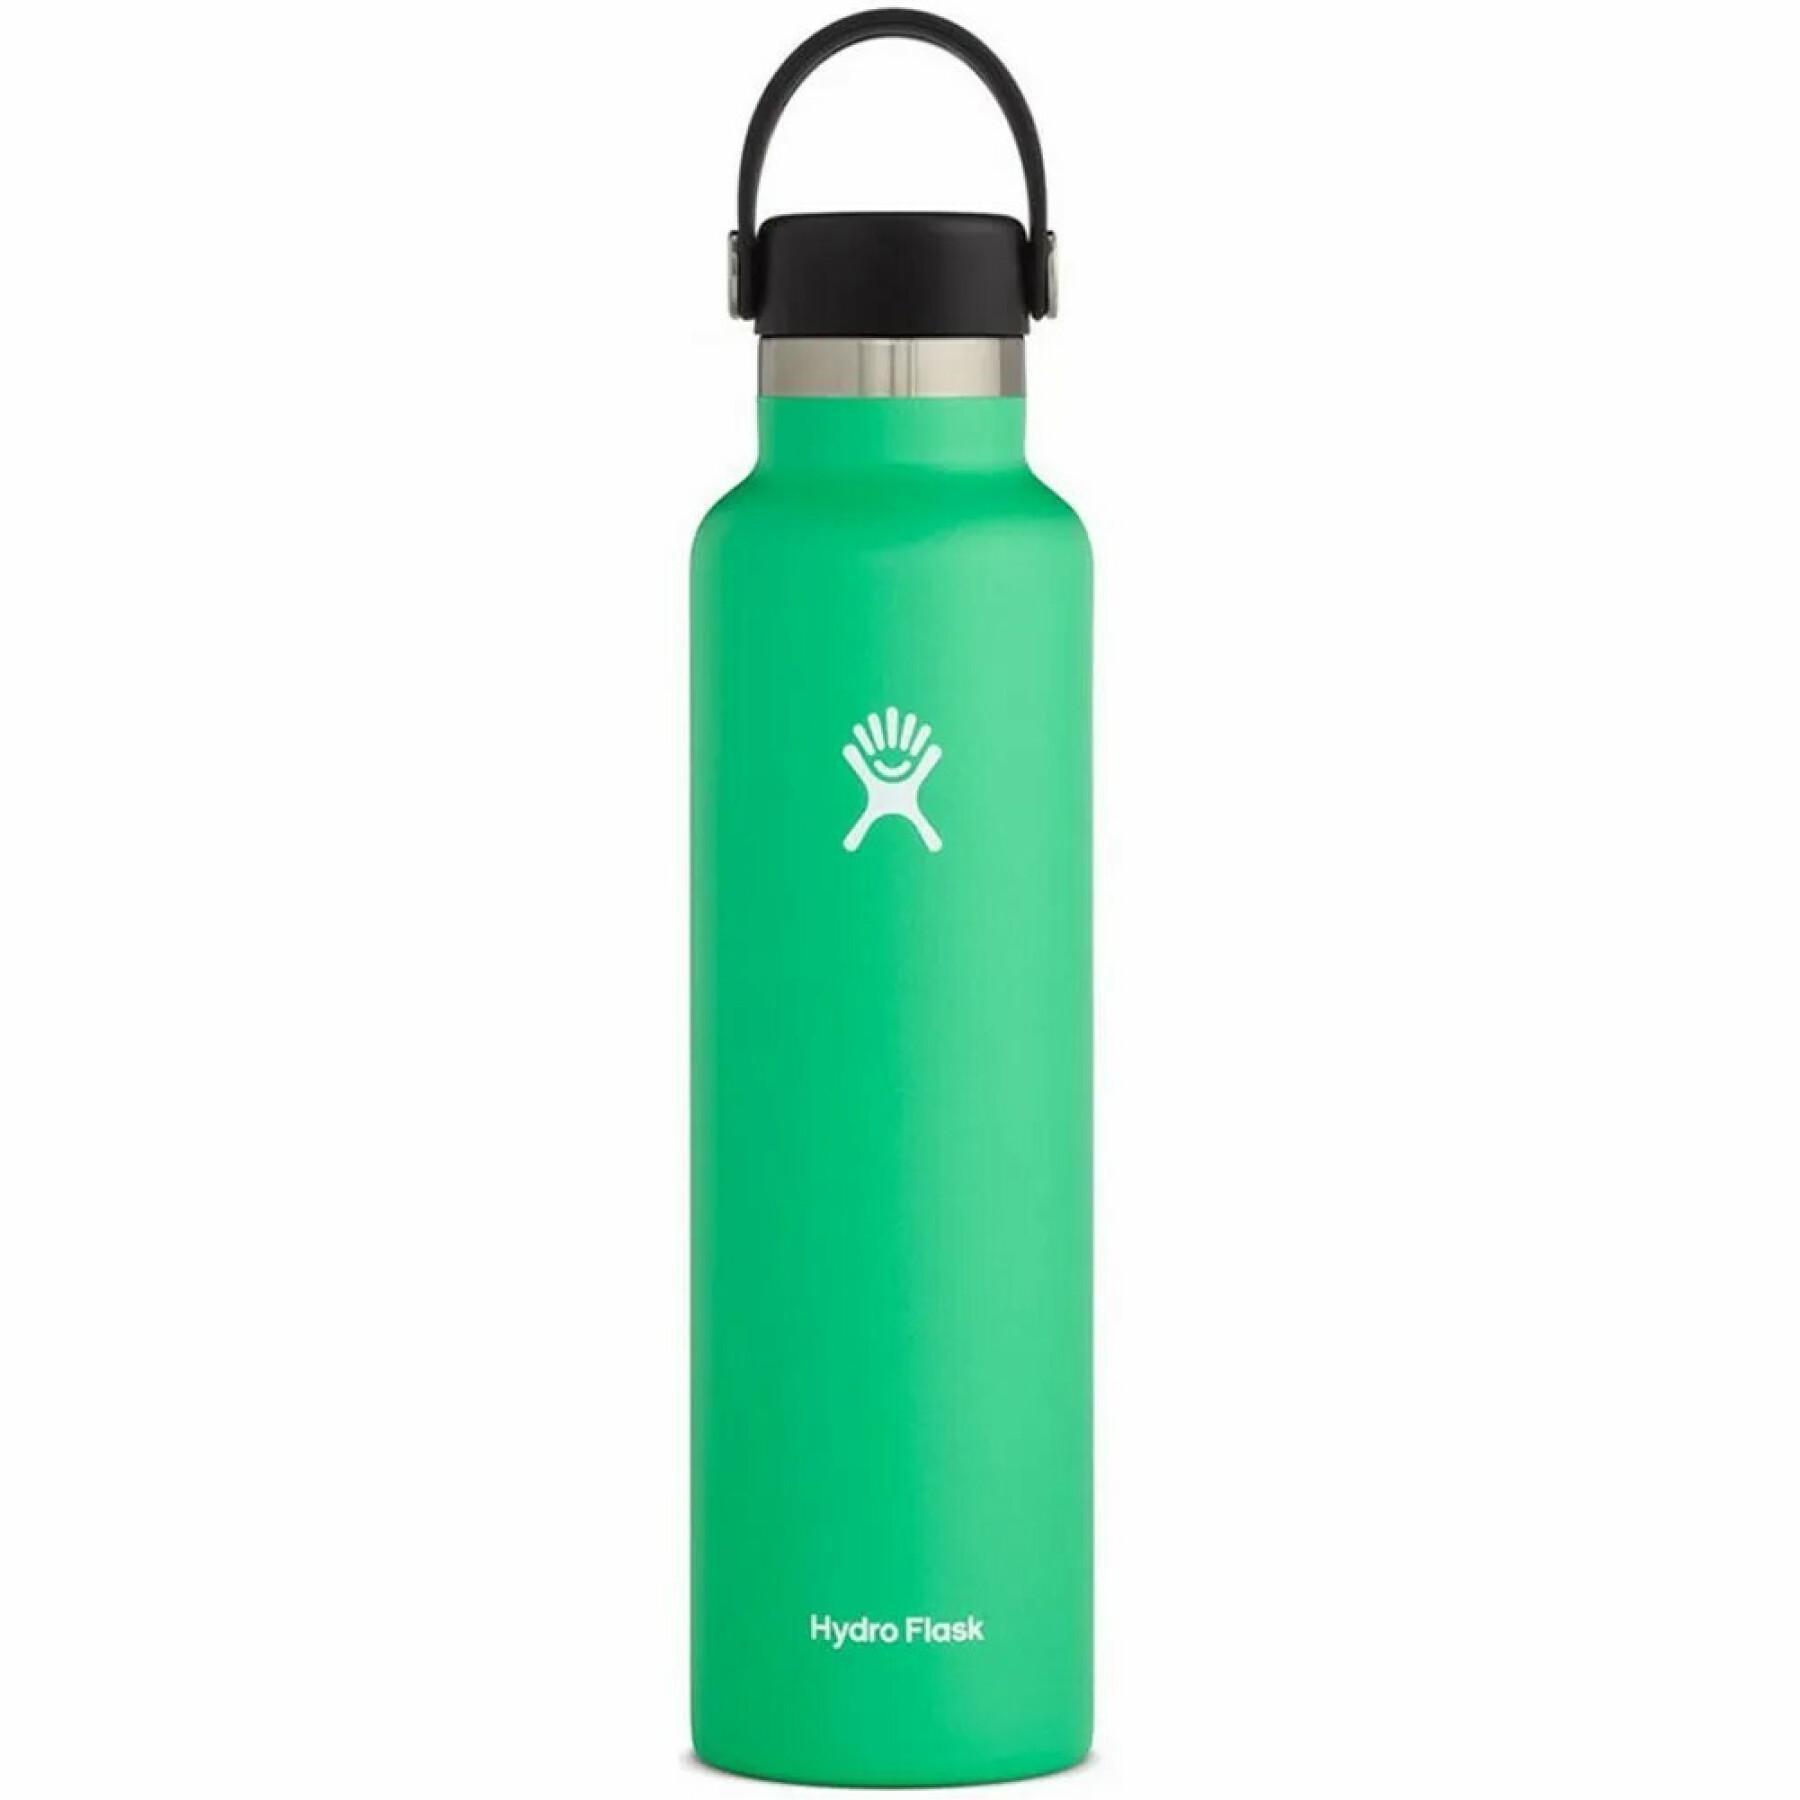 Standaard thermosfles Hydro Flask with standard mouth flew cap 24 oz